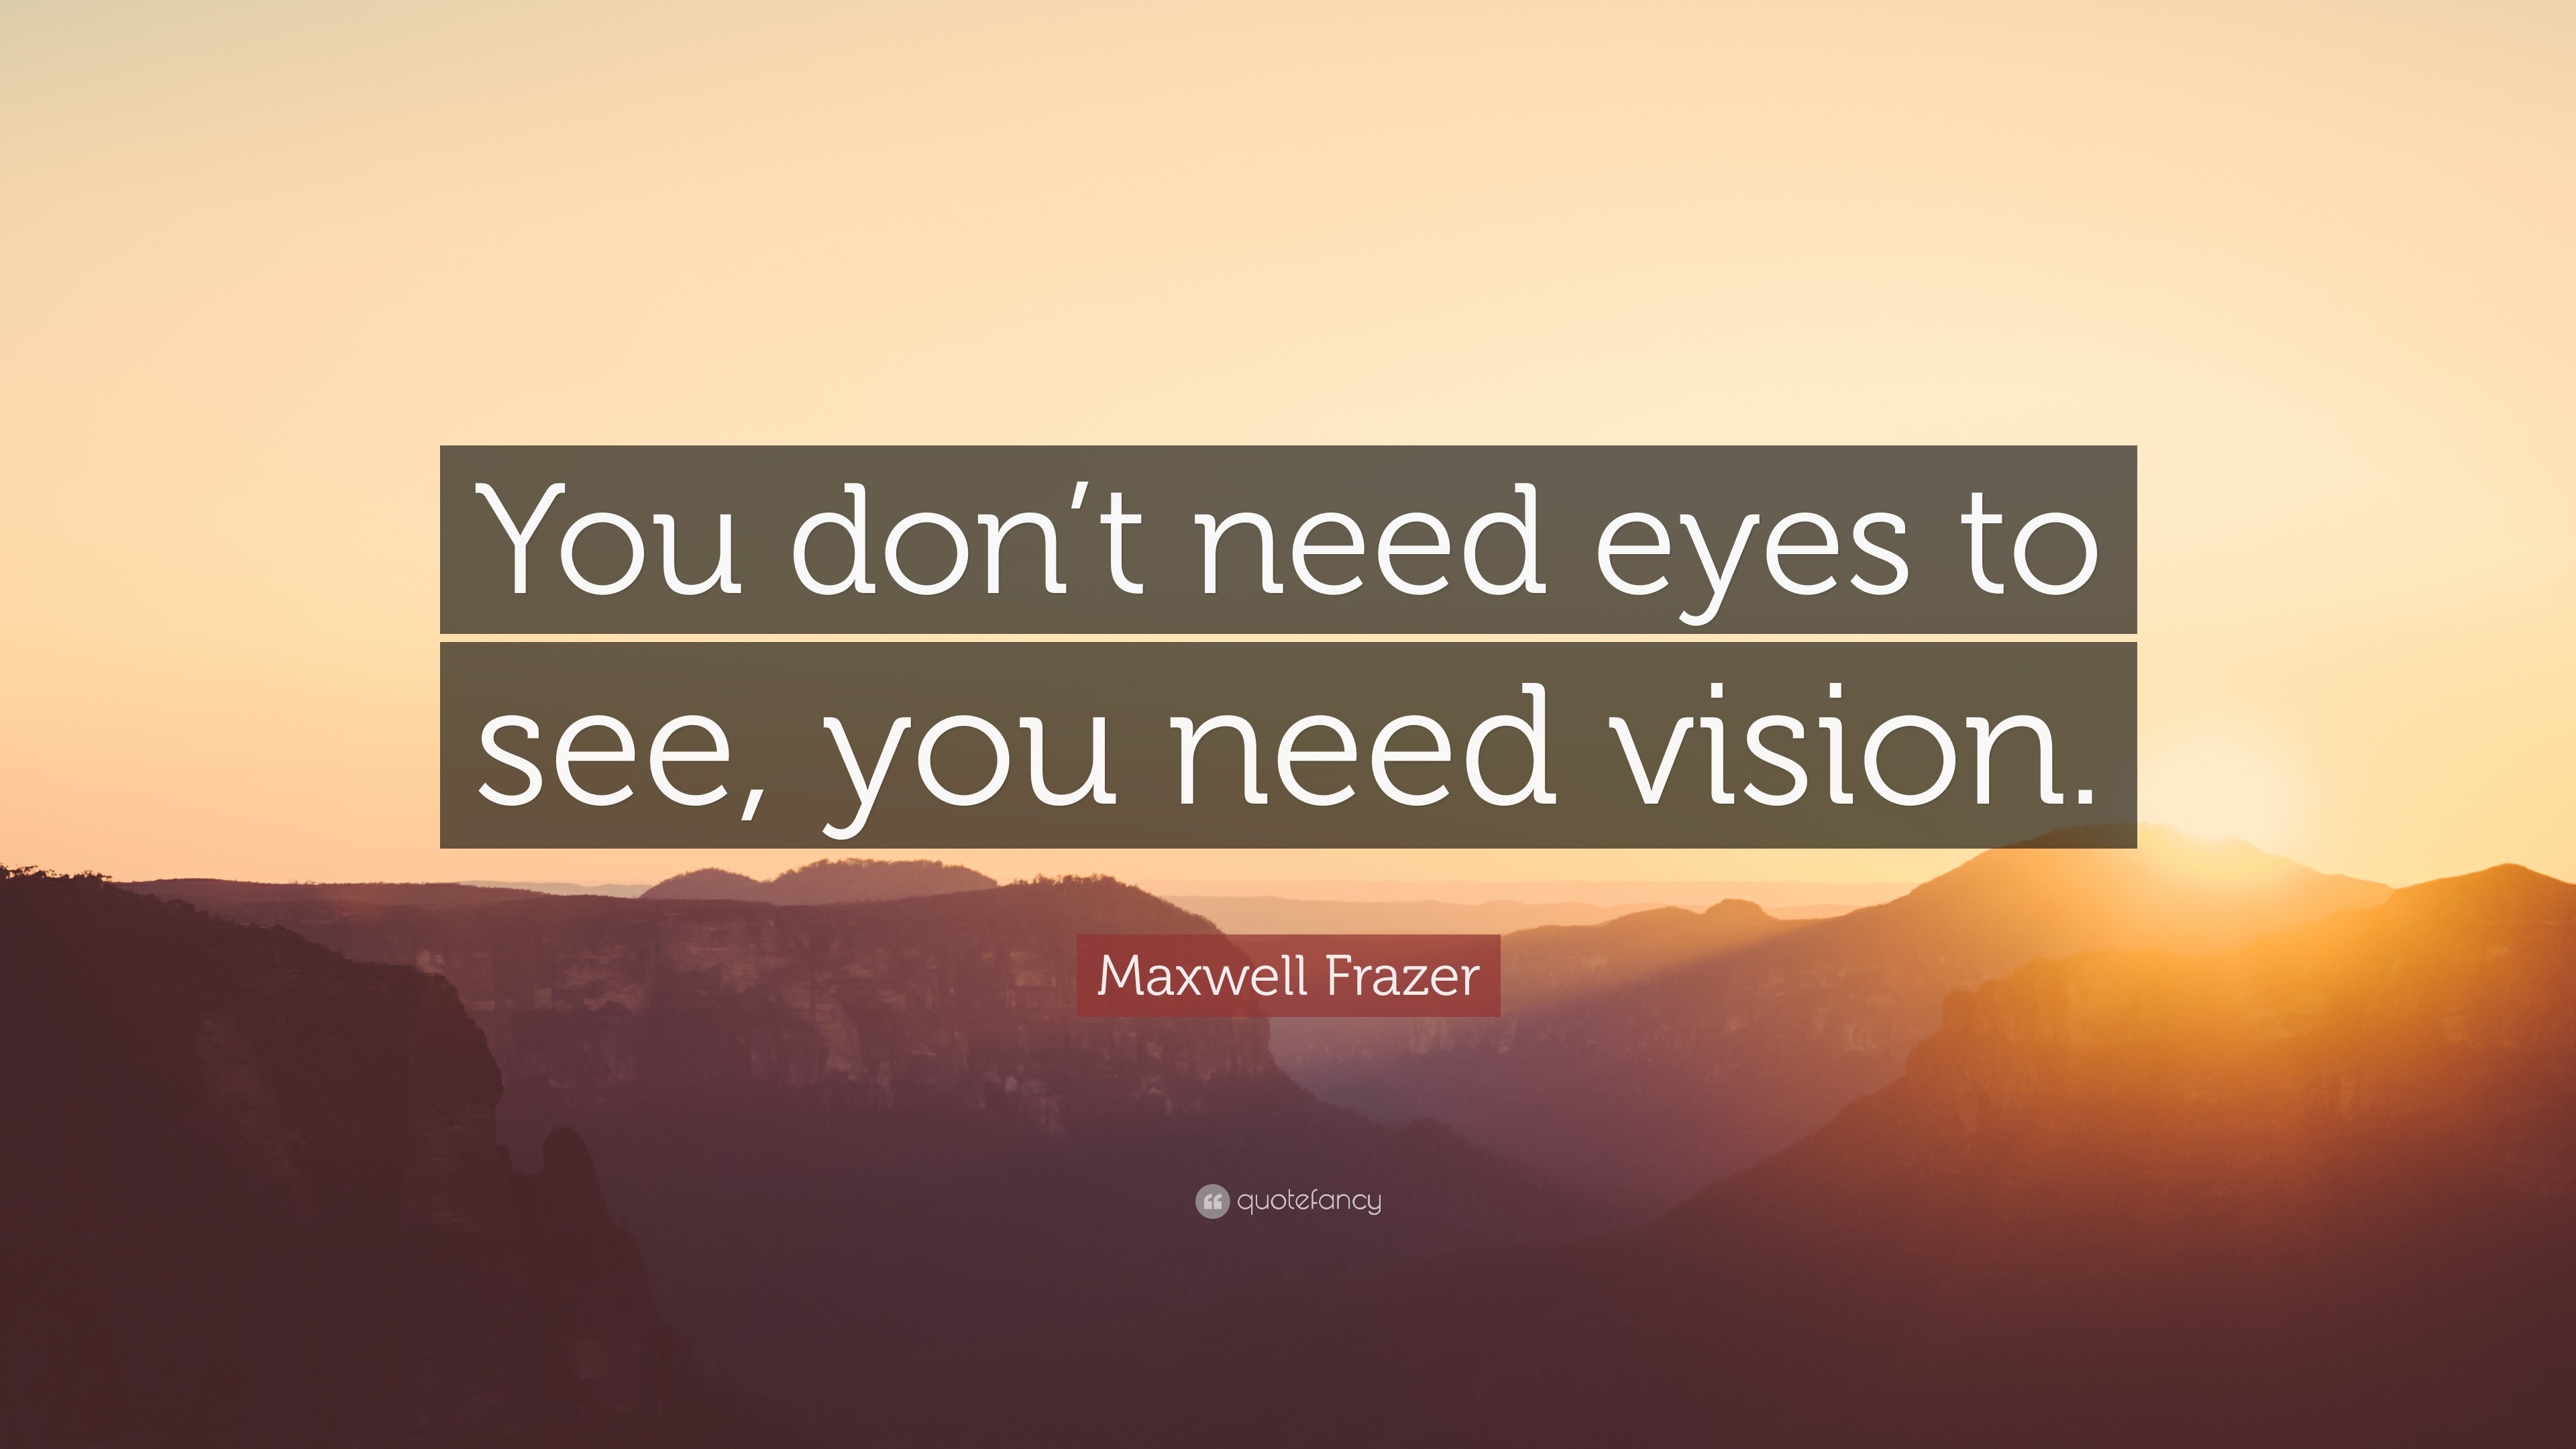 Maxwell Frazer Quote: “You don’t need eyes to see, you need vision.”